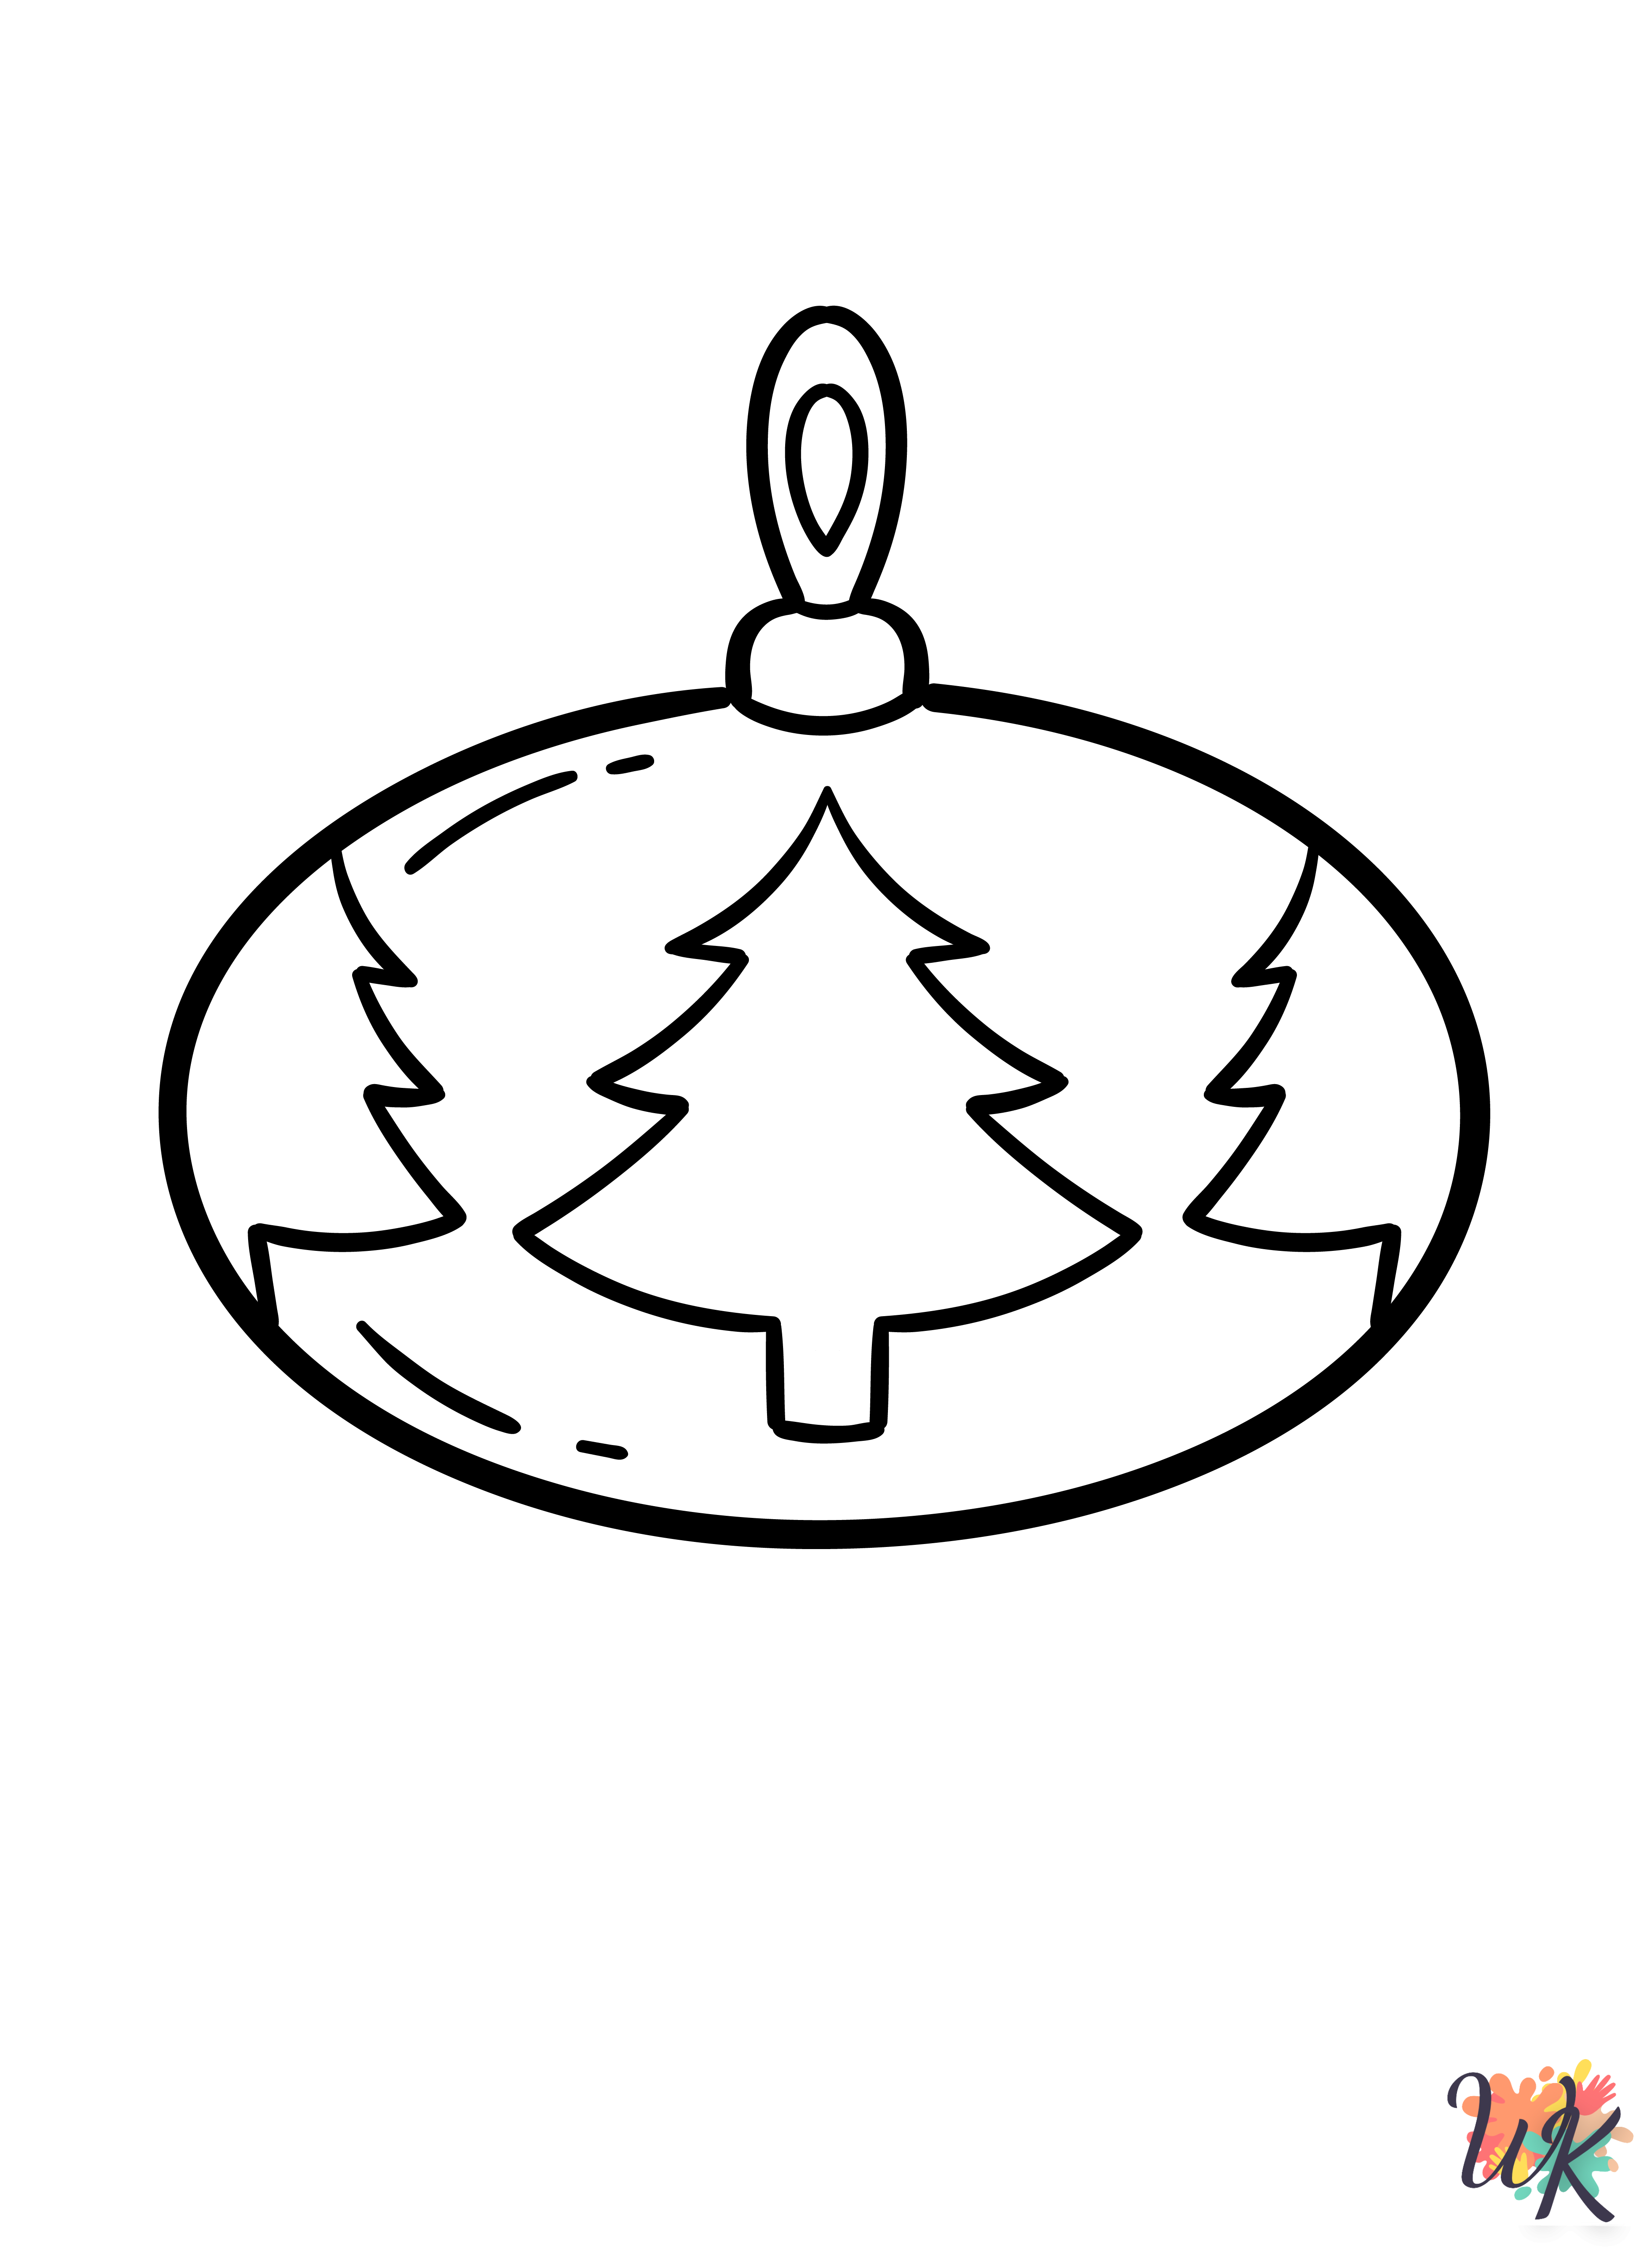 free Christmas Ornament coloring pages for kids